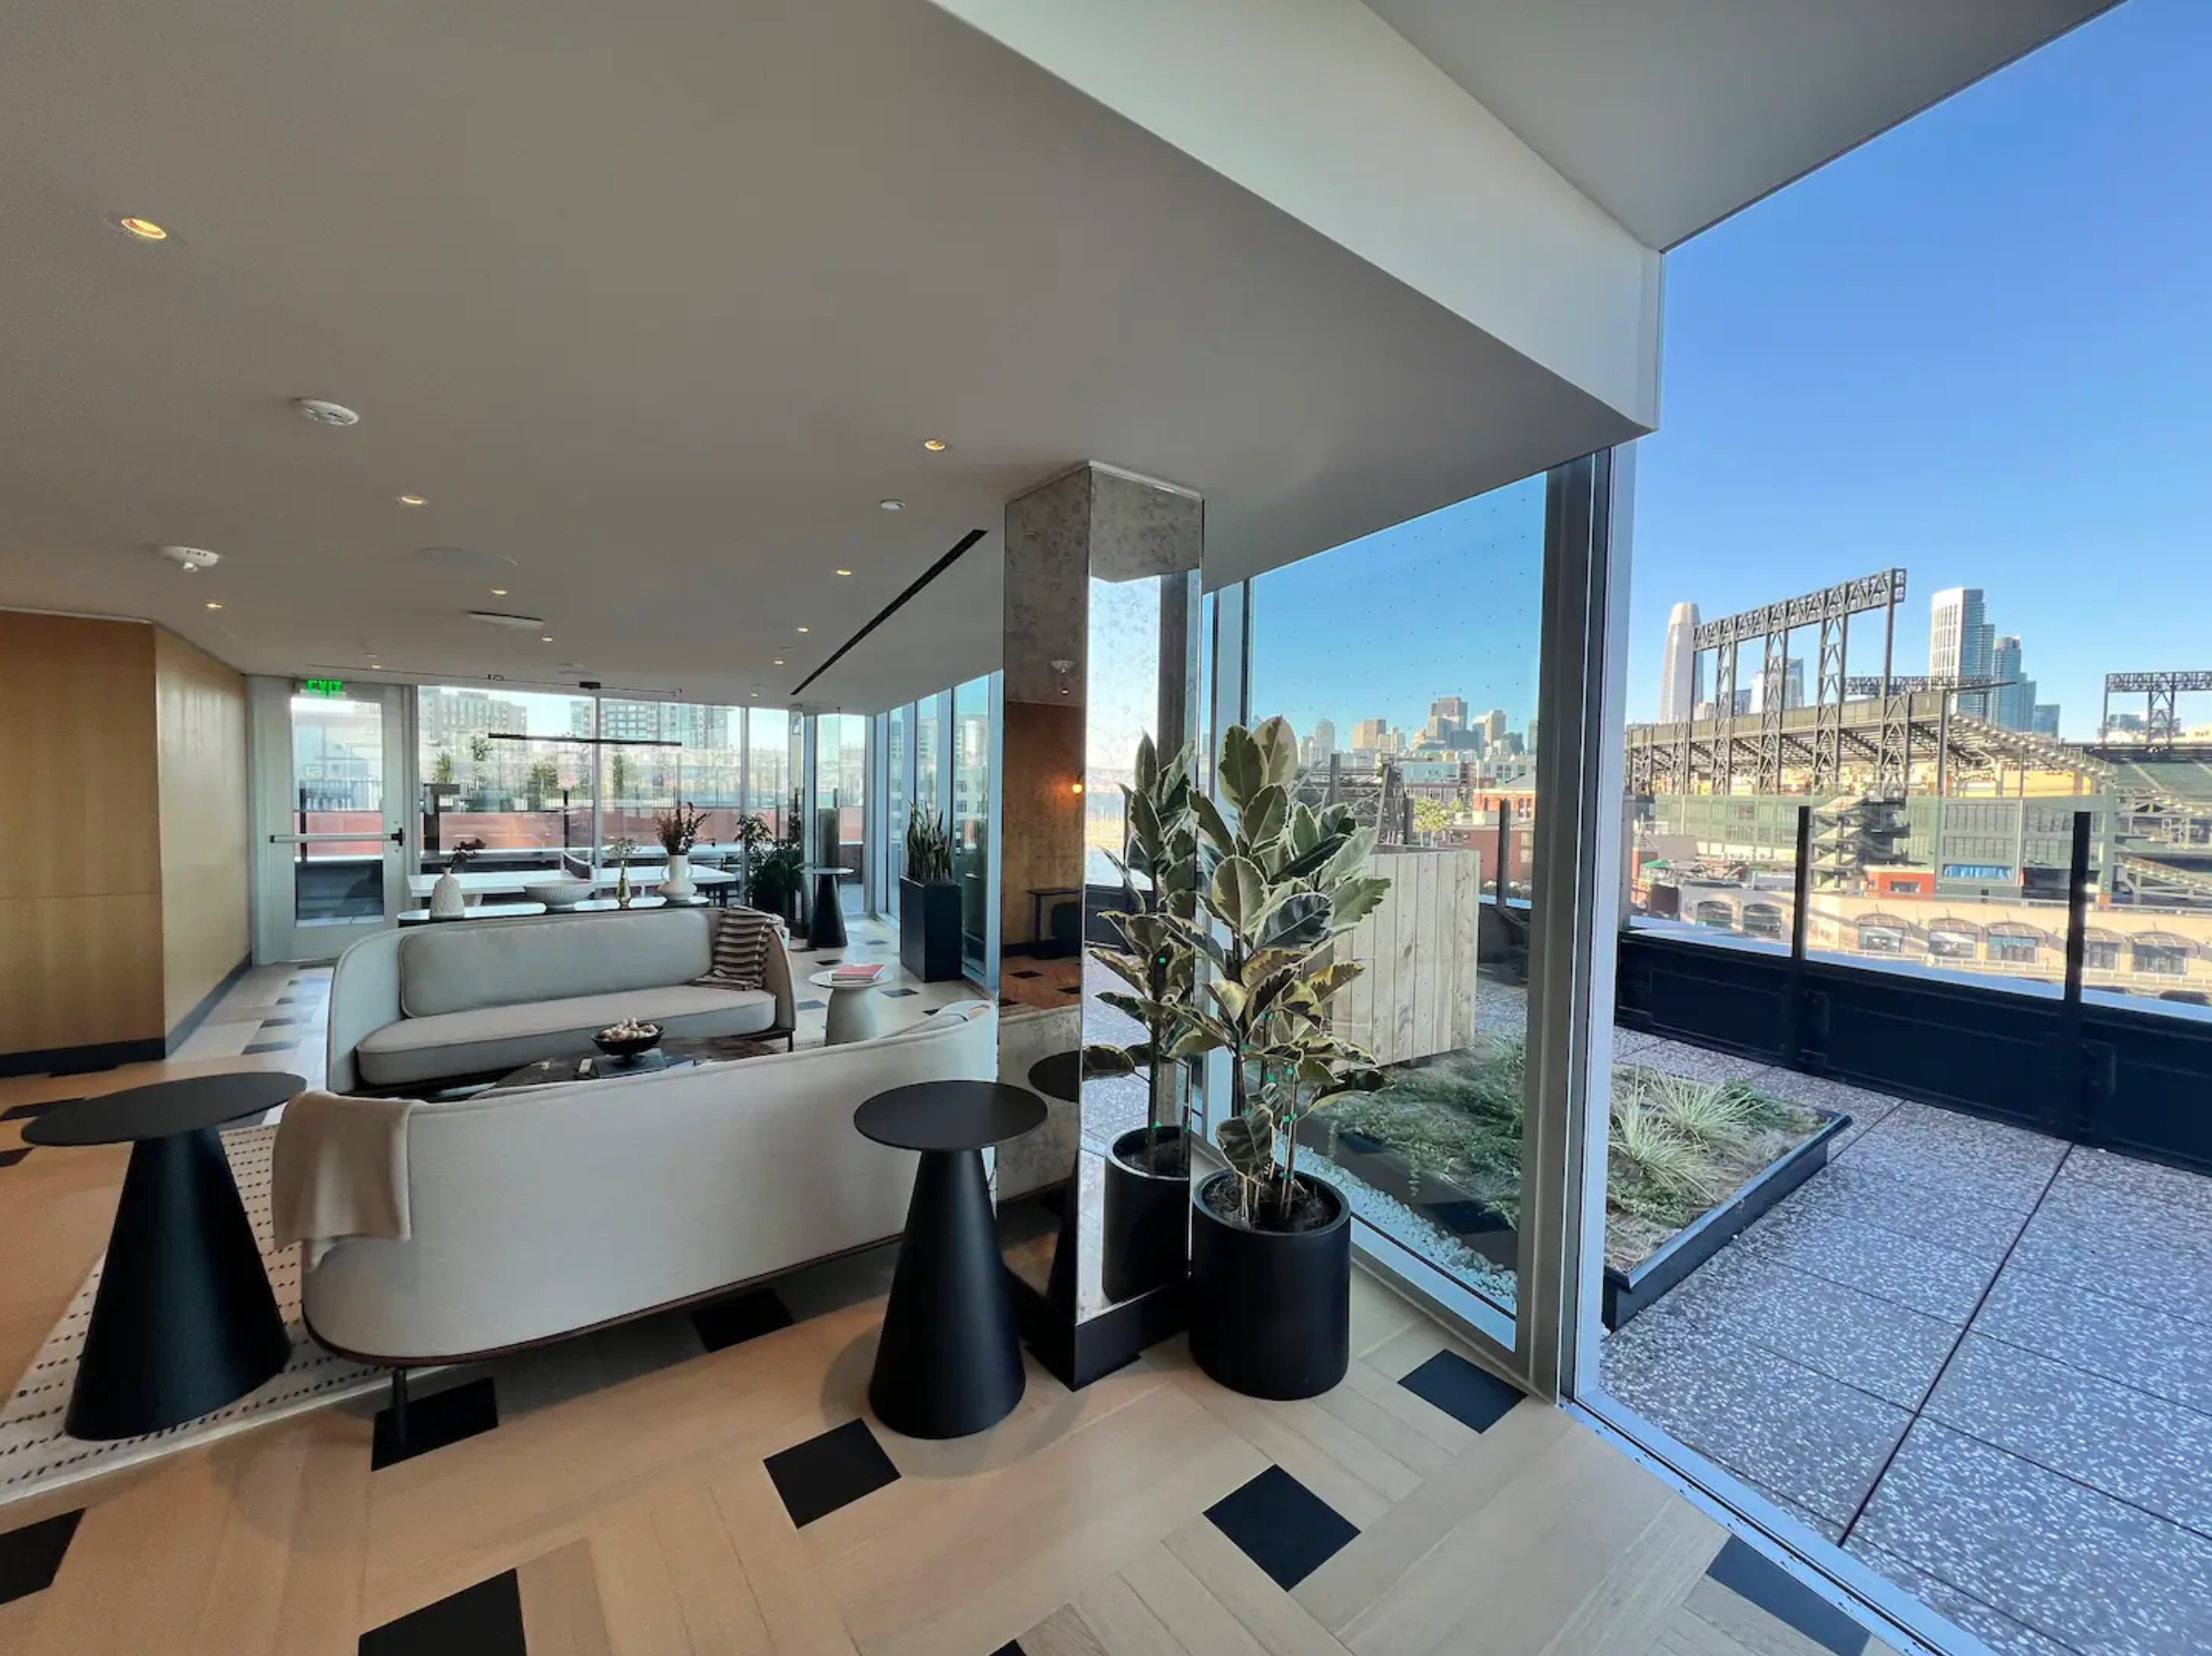 <p><strong>Bed & bath:</strong> 1 bedroom, 1.5 baths<br> <strong>Top amenities:</strong> Iconic view of San Francisco, free parking spot, luxury building amenities</p> <p>If you’re looking to fully immerse yourself in the San Francisco sights, you can’t get much better than this one-bedroom apartment located directly across the street from Oracle Park, home to the San Francisco Giants. The floor-to-ceiling windows from the bedroom and living area display a close-up, unobstructed skyline view of the baseball field and the waterfront, including the Bay Bridge. The space itself has ultra-sleek furniture and decor, a king bed, private balconies, and luxury amenities—take advantage of the building's gym, pool, hot tub, rooftop, and more.</p> $680, Airbnb (starting price). <a href="https://www.airbnb.com/rooms/975388631678738792">Get it now!</a><p>Sign up to receive the latest news, expert tips, and inspiration on all things travel</p><a href="https://www.cntraveler.com/newsletter/the-daily?sourceCode=msnsend">Inspire Me</a>